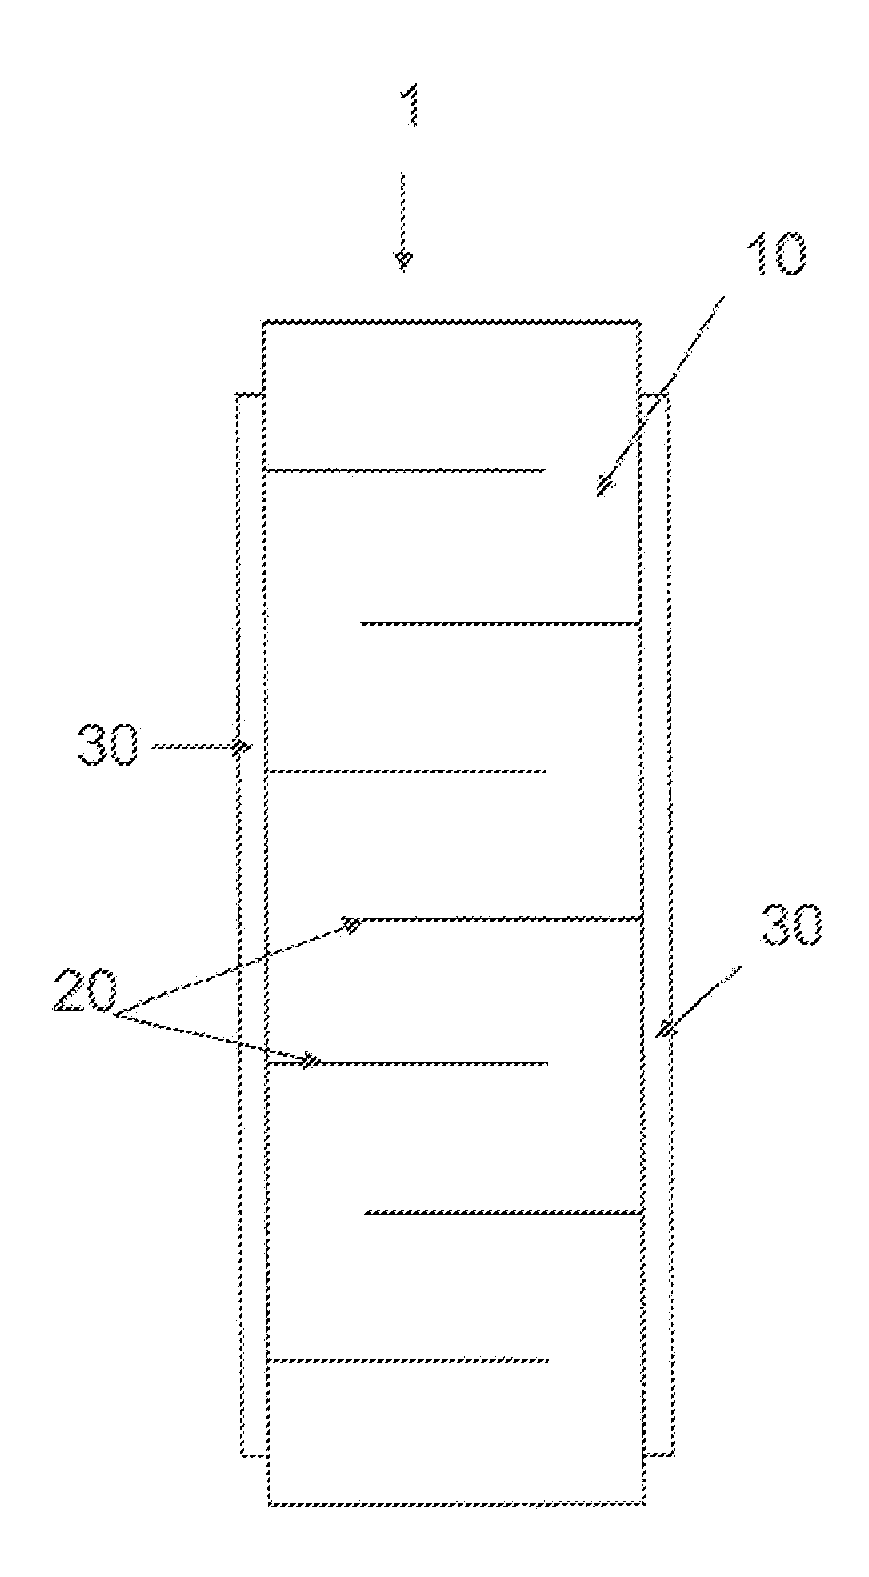 Piezoelectric Component and Method for Producing a Piezoelectric Component